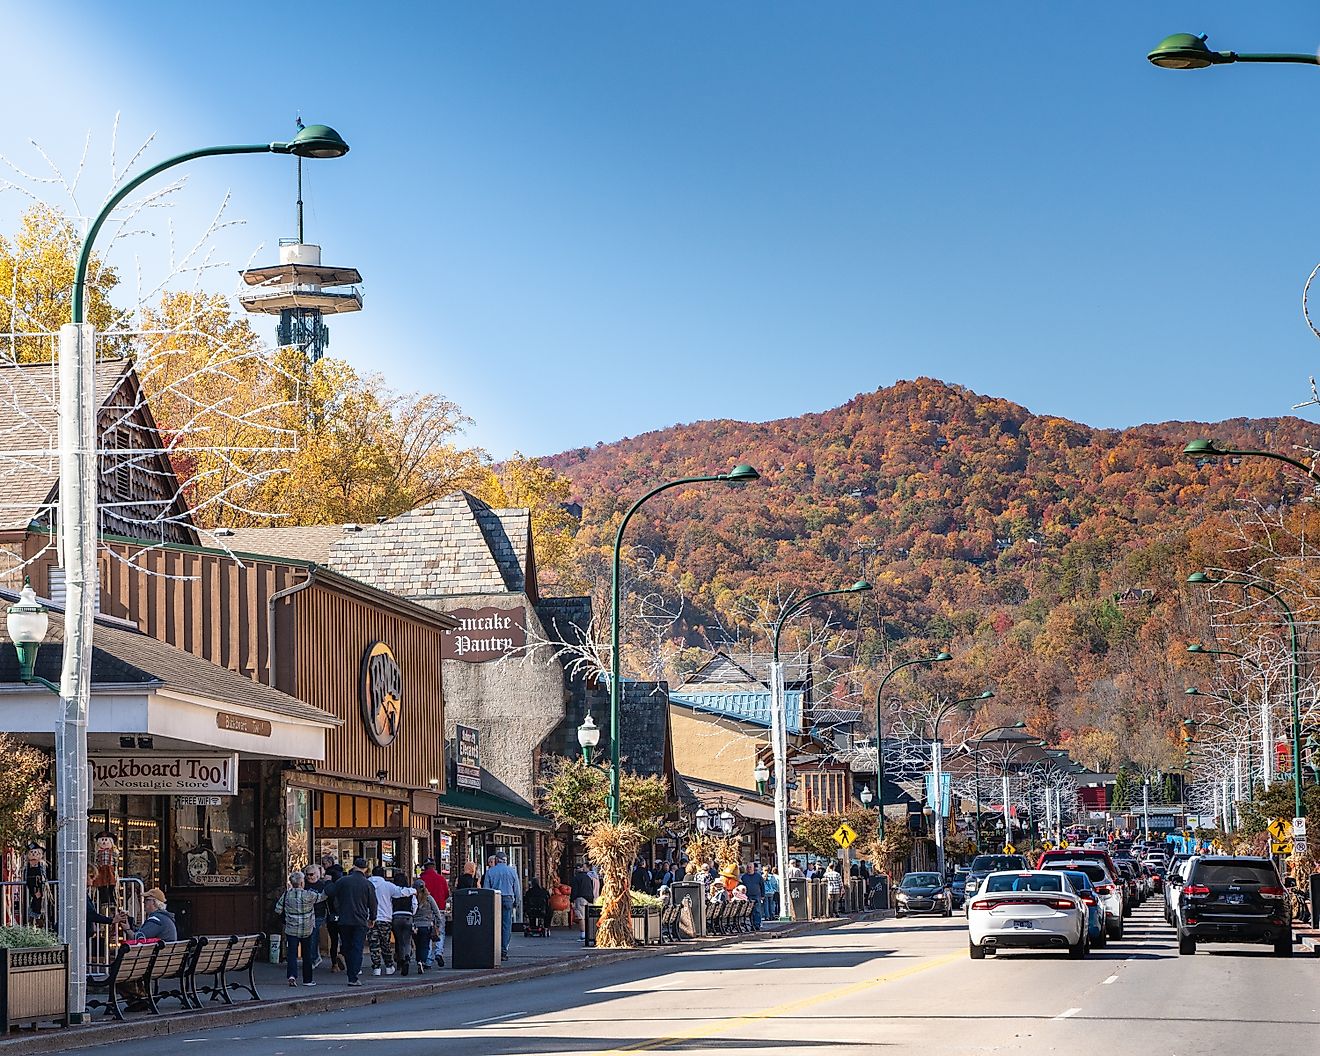 Gatlinburg, Tennessee: Street view of the popular tourist city in the Smoky Mountains with attractions in view. Editorial credit: Little Vignettes Photo / Shutterstock.com